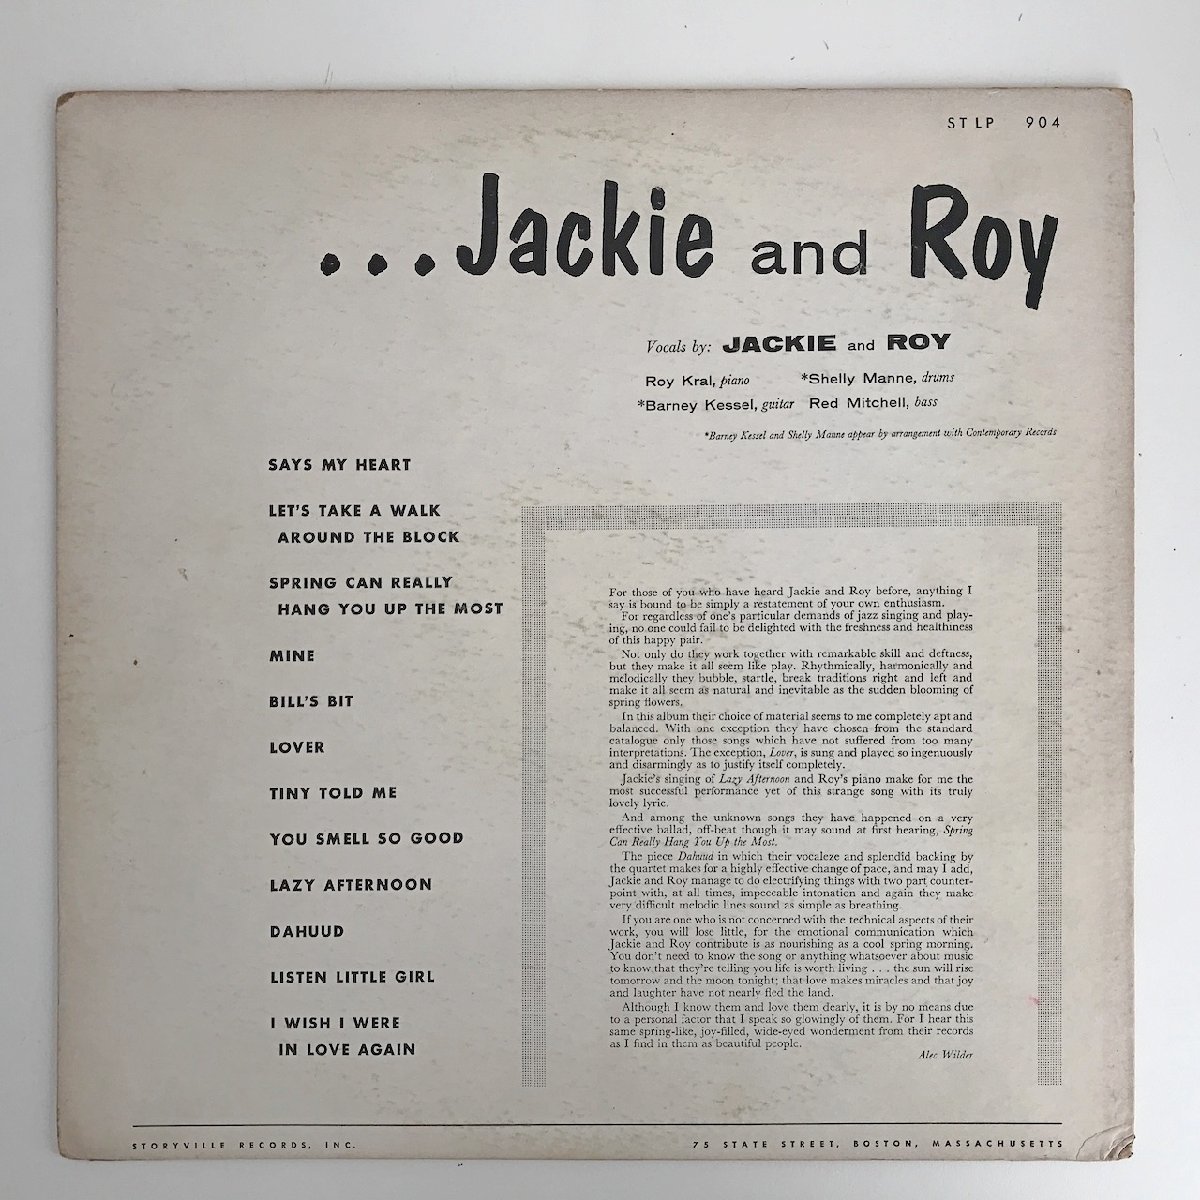 LP/ JACKIE AND ROY / STORYVILLE PRESENTS JACKIE AND ROY / US盤 オリジナル STORYVILLE STLP904 40311-4188の画像2